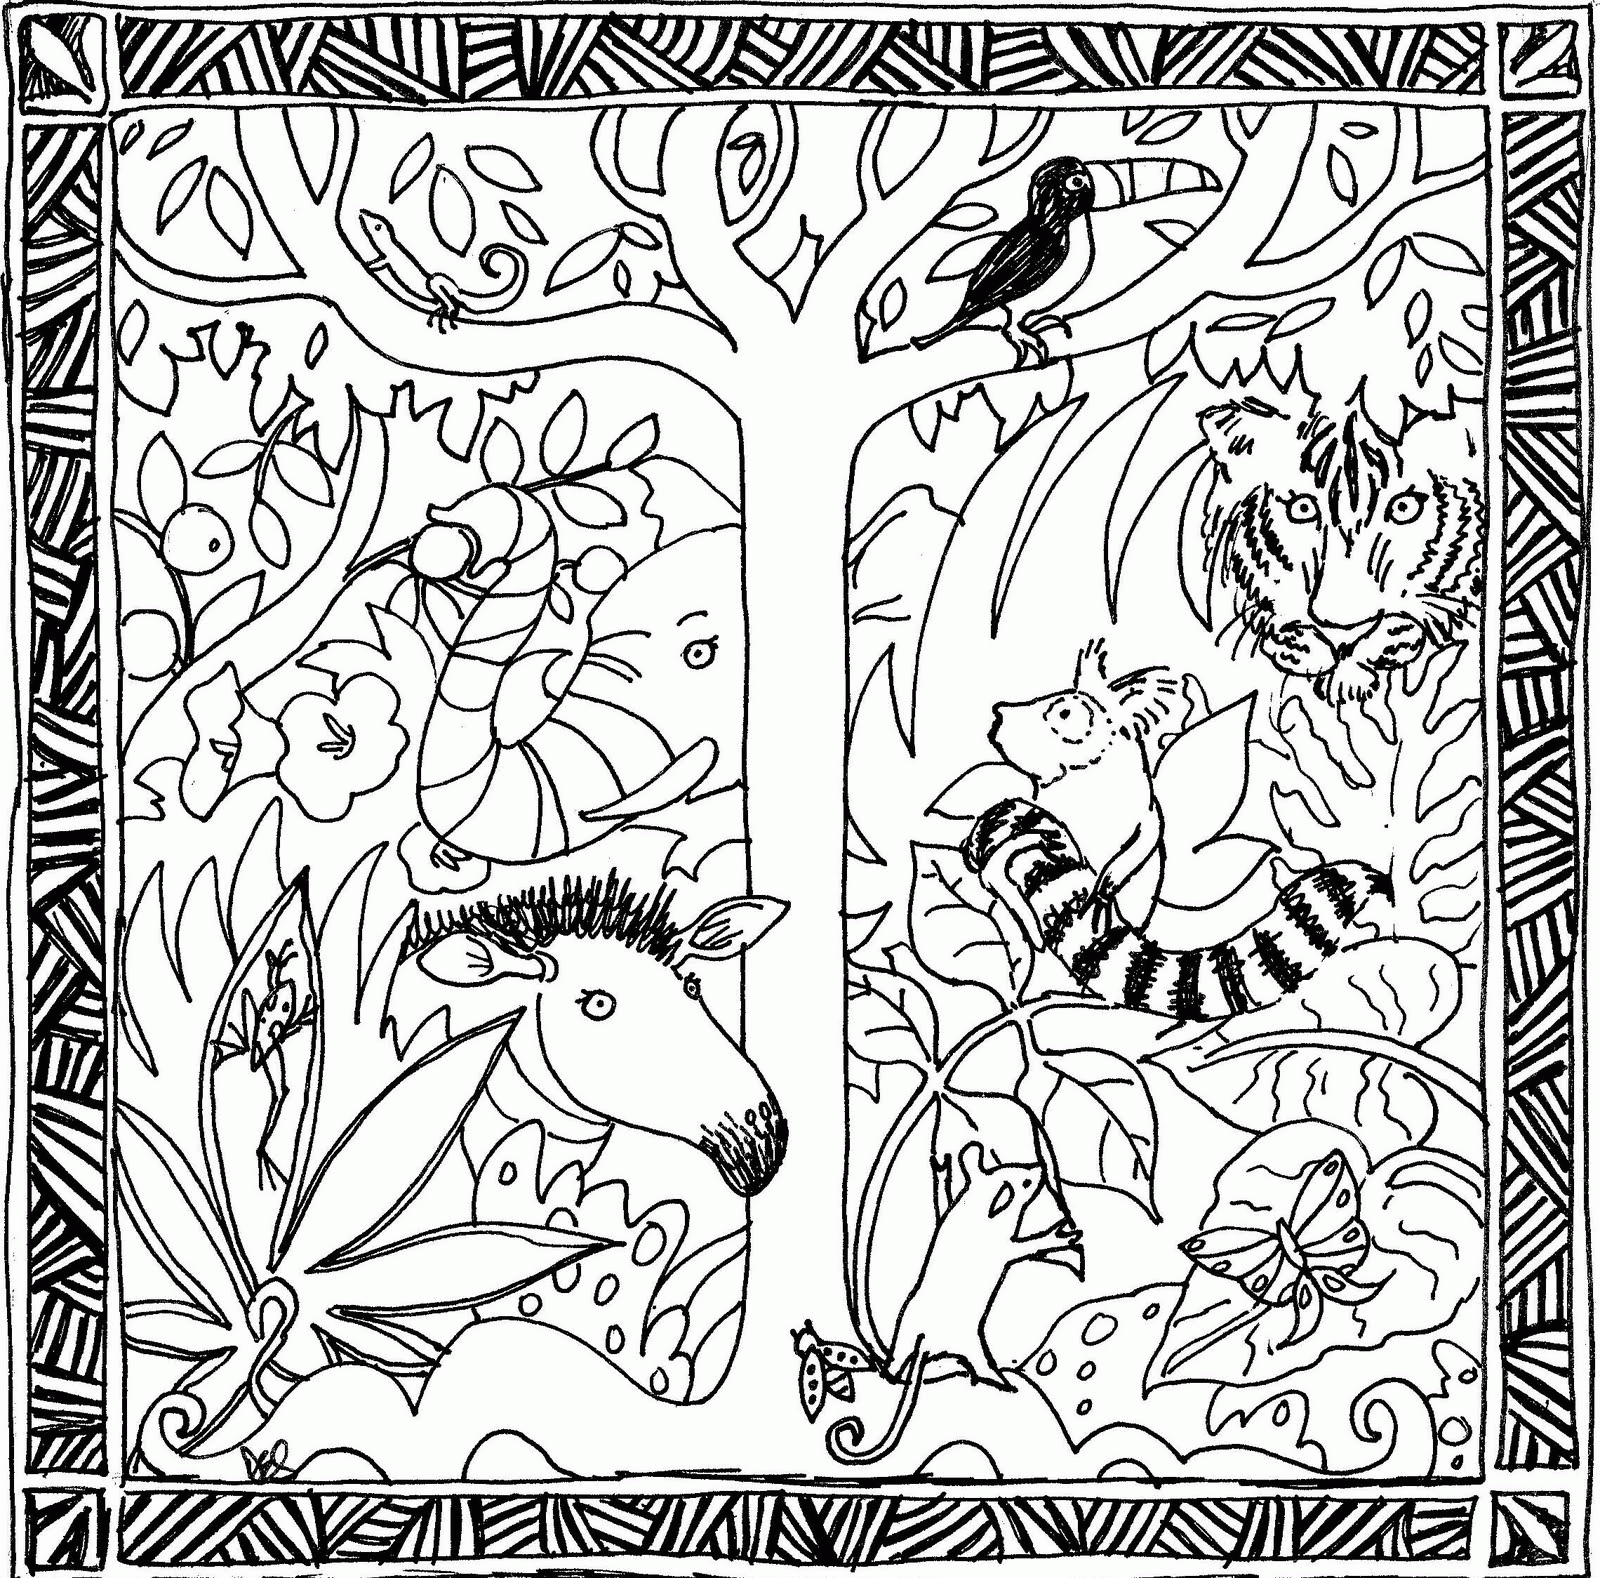 13 Free Pictures for: Rainforest Coloring Pages. Temoon.us